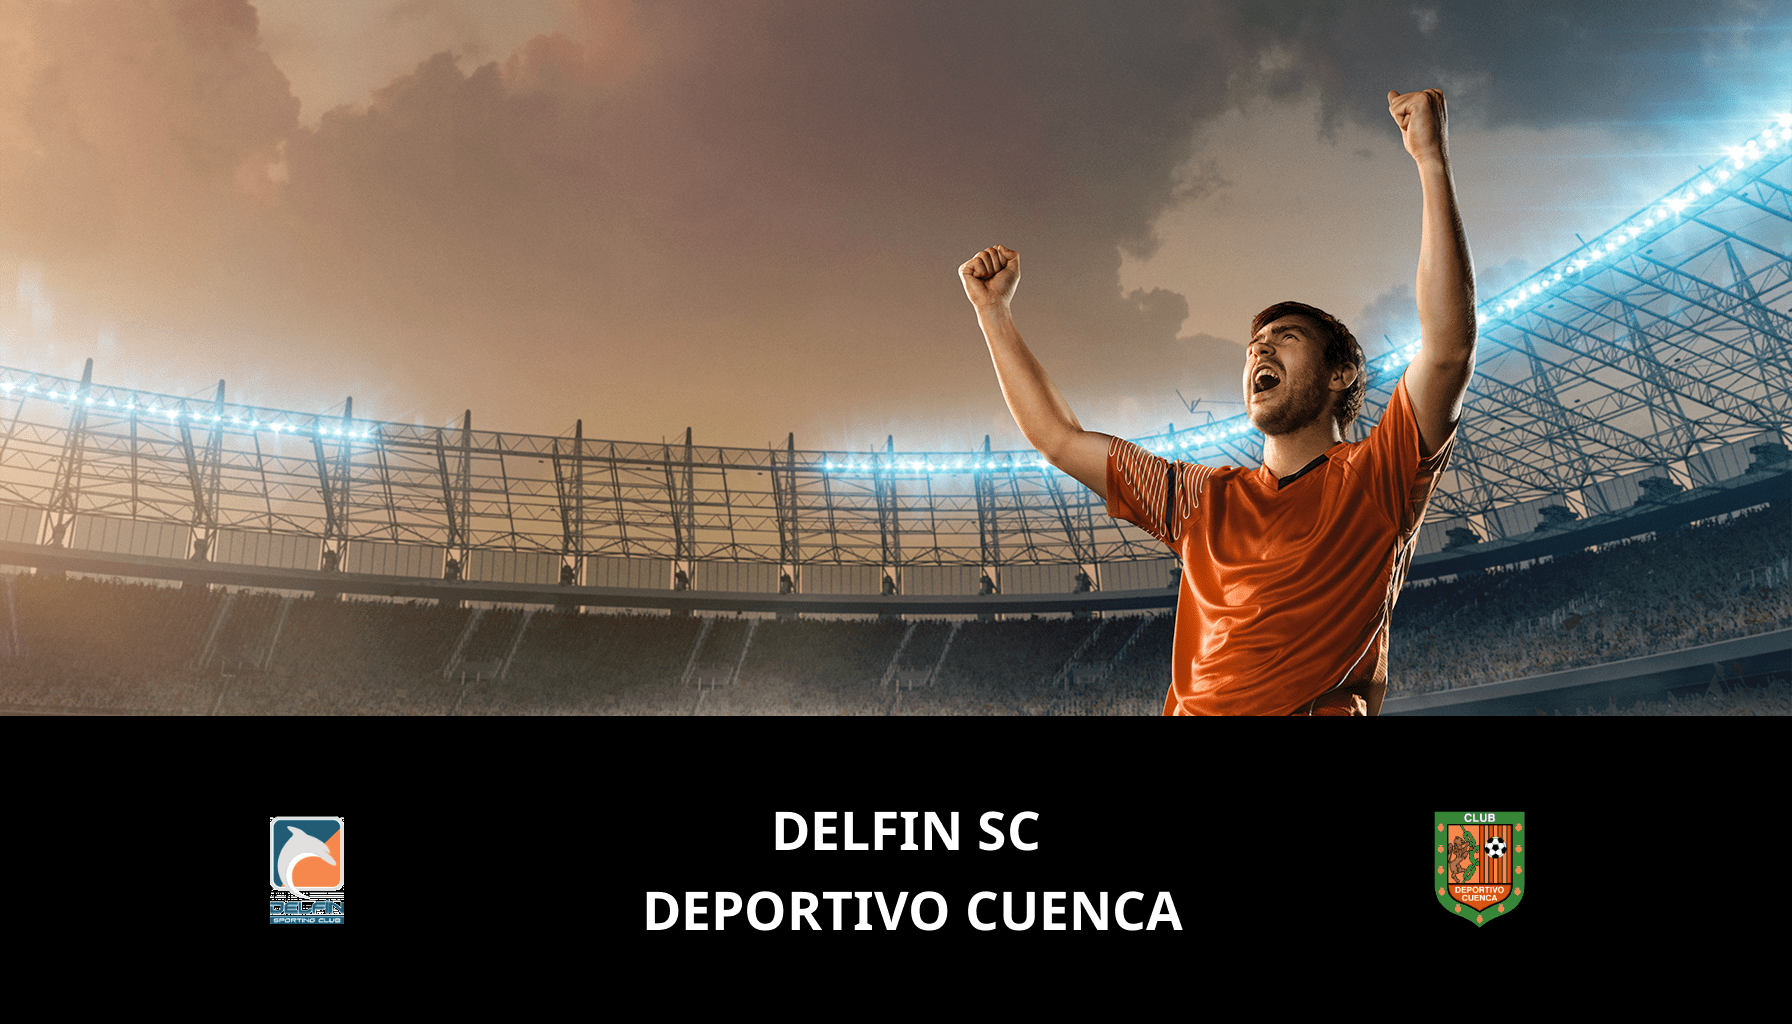 Prediction for Delfin SC VS Deportivo Cuenca on 14/11/2023 Analysis of the match